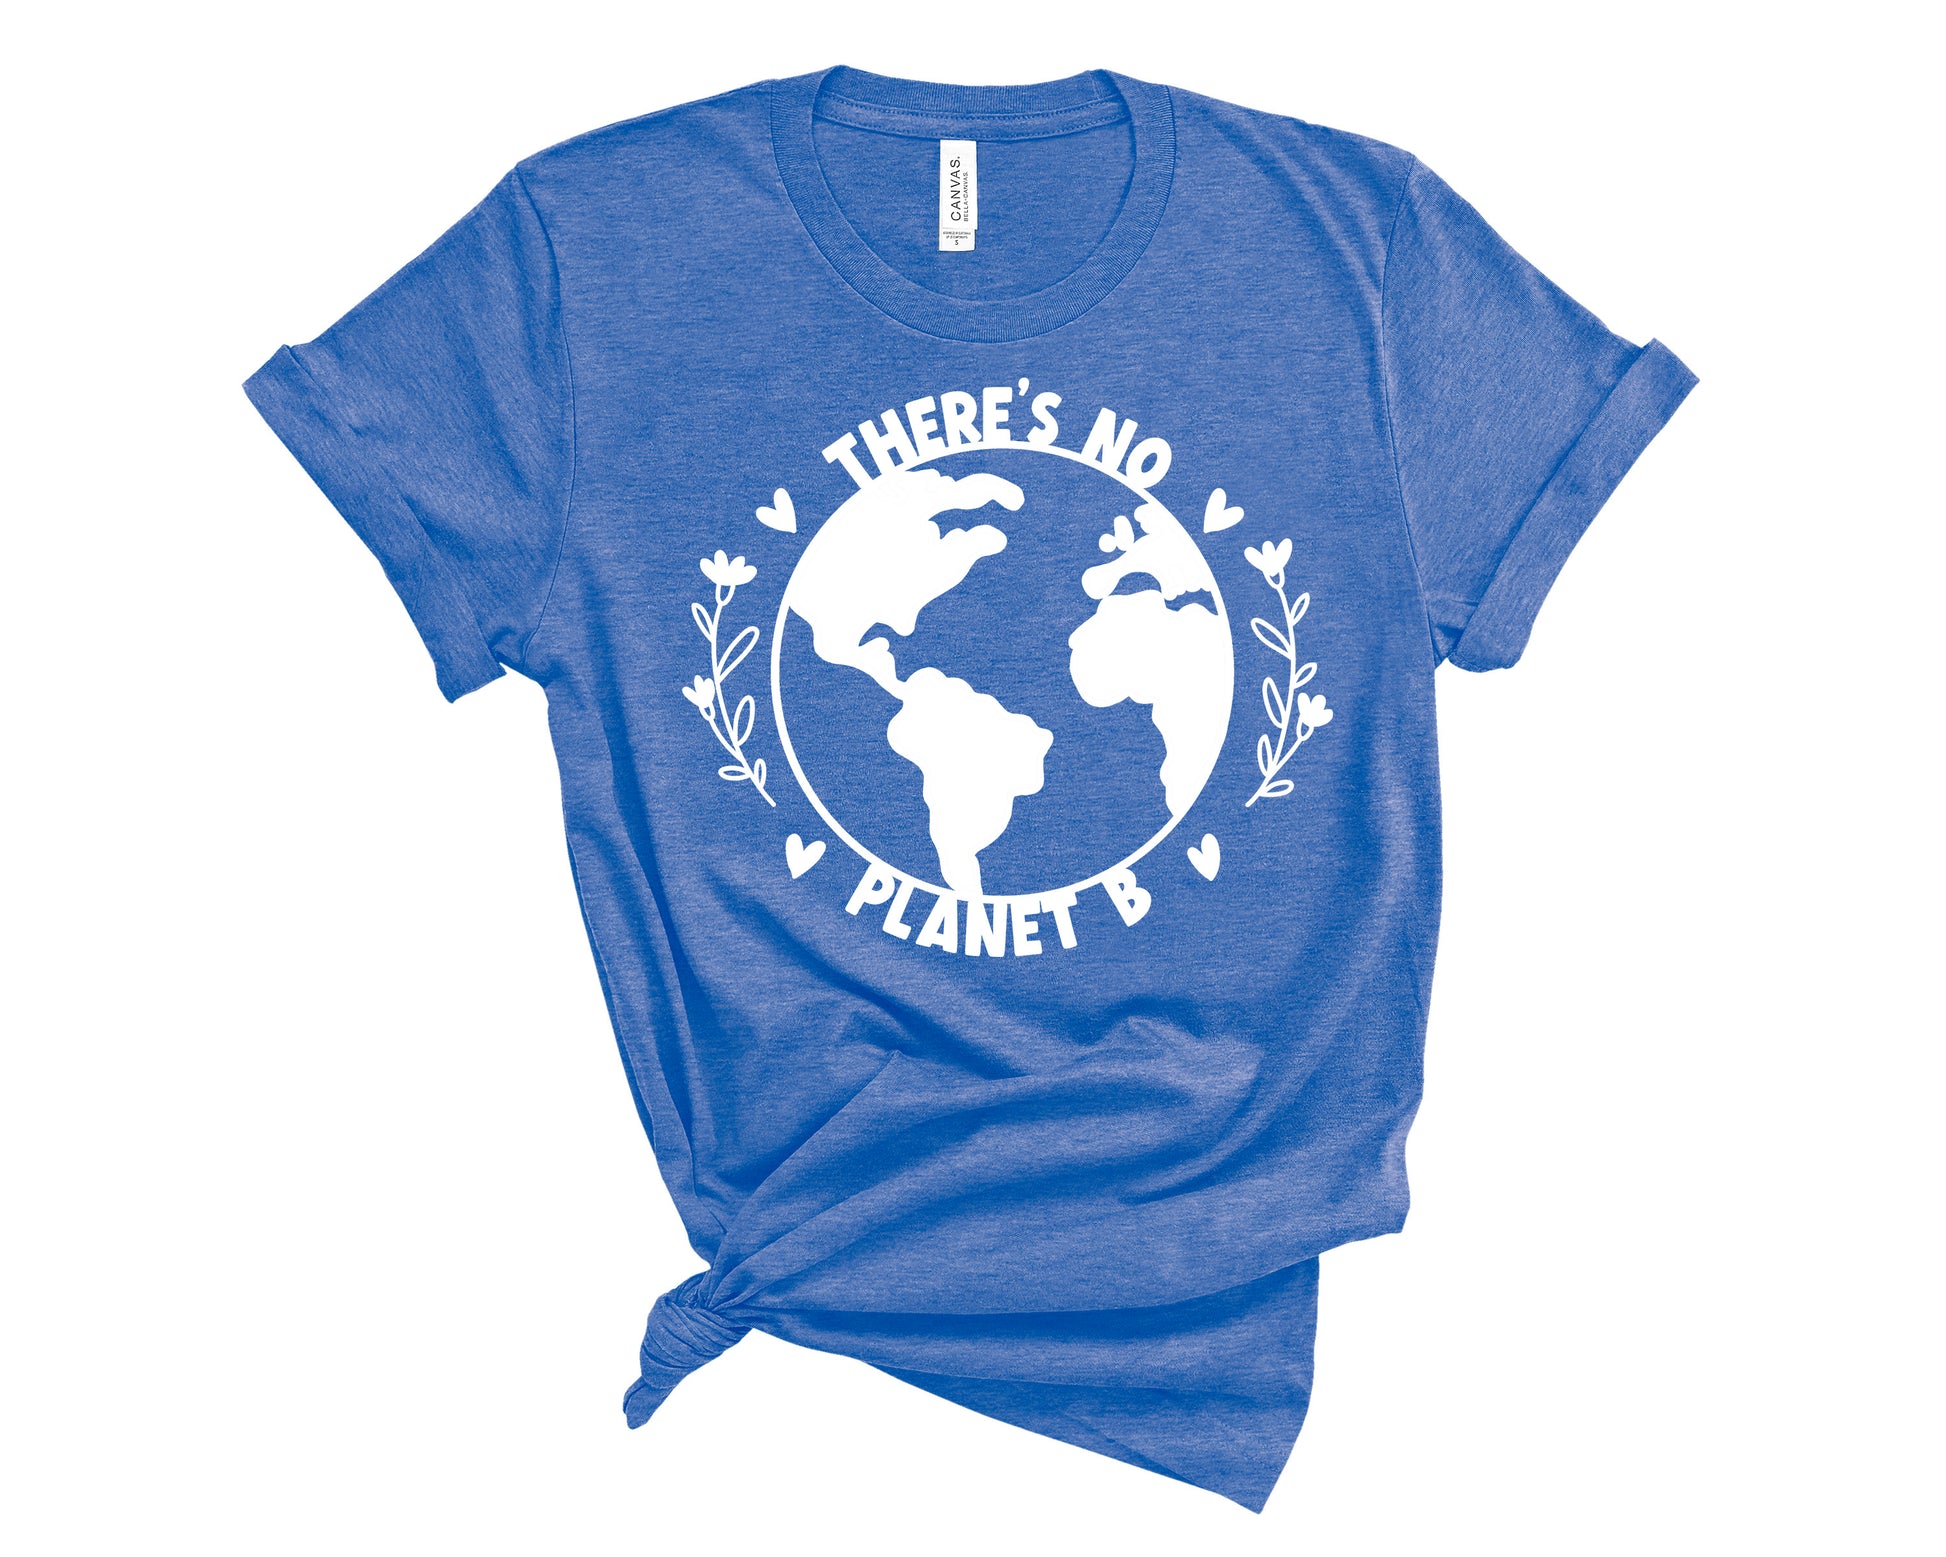 There's No Planet B shirt